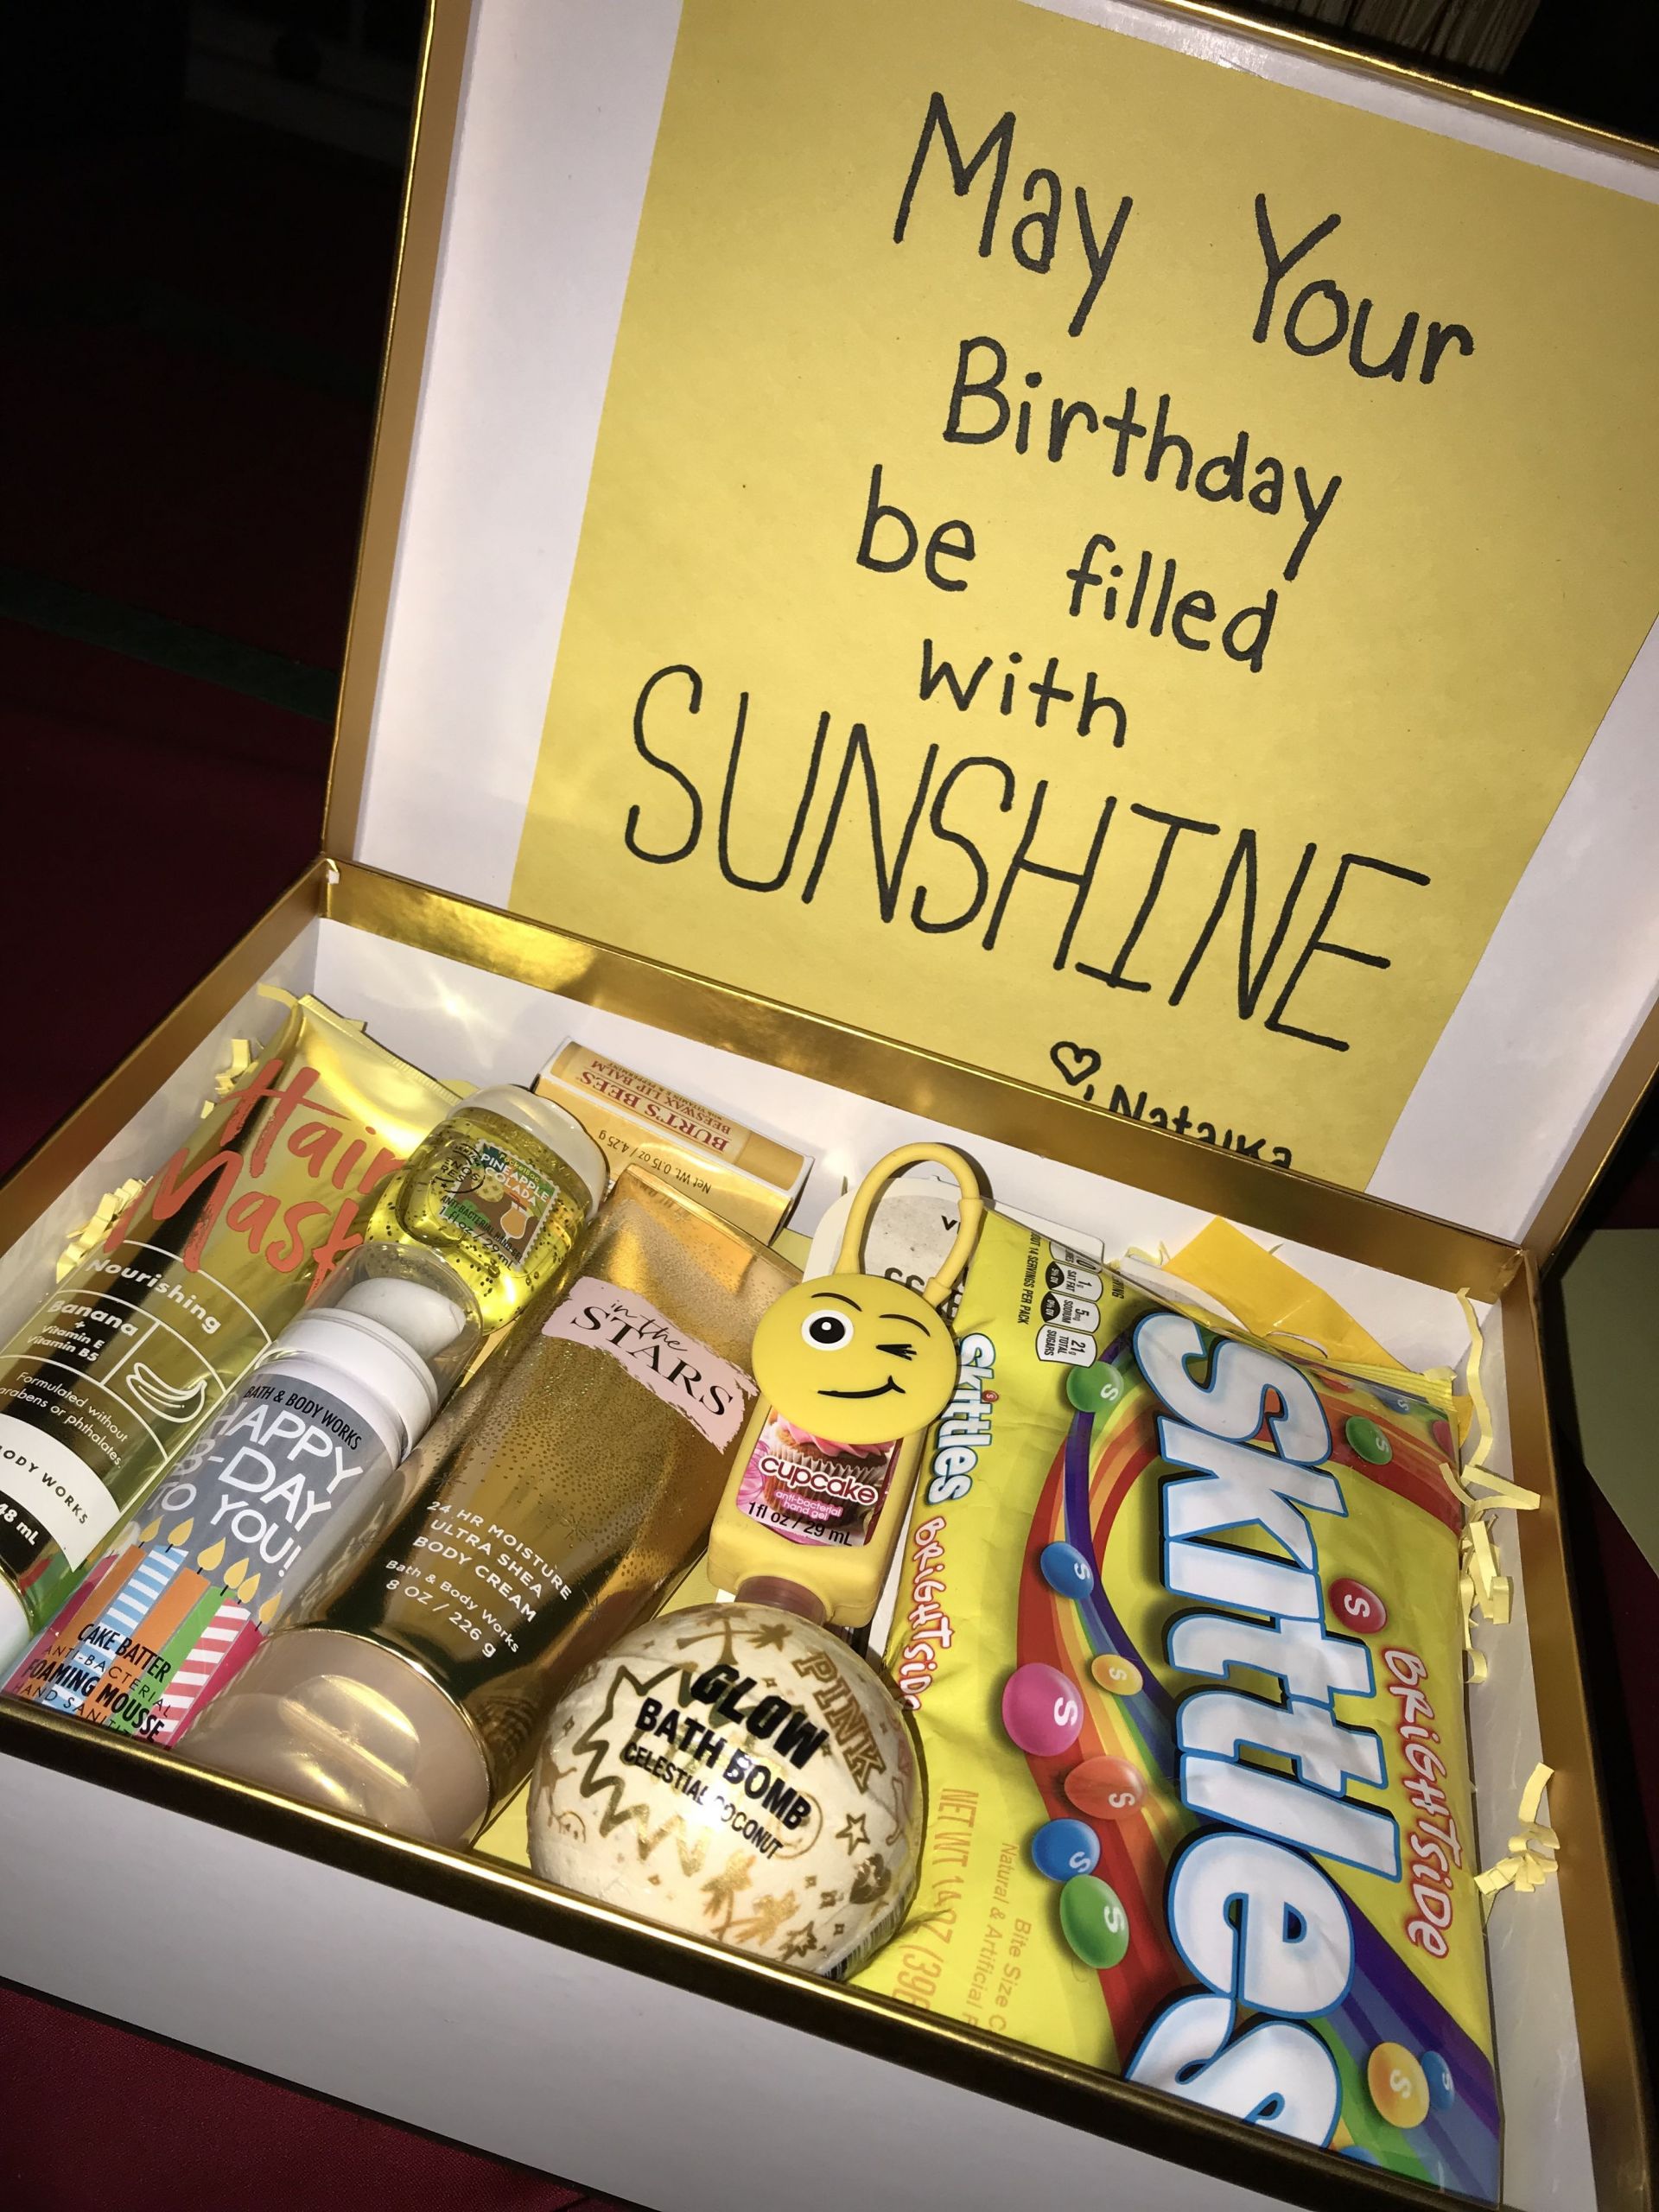 Simple Gift Ideas For Girlfriend
 This is a cute birthday present idea for friends